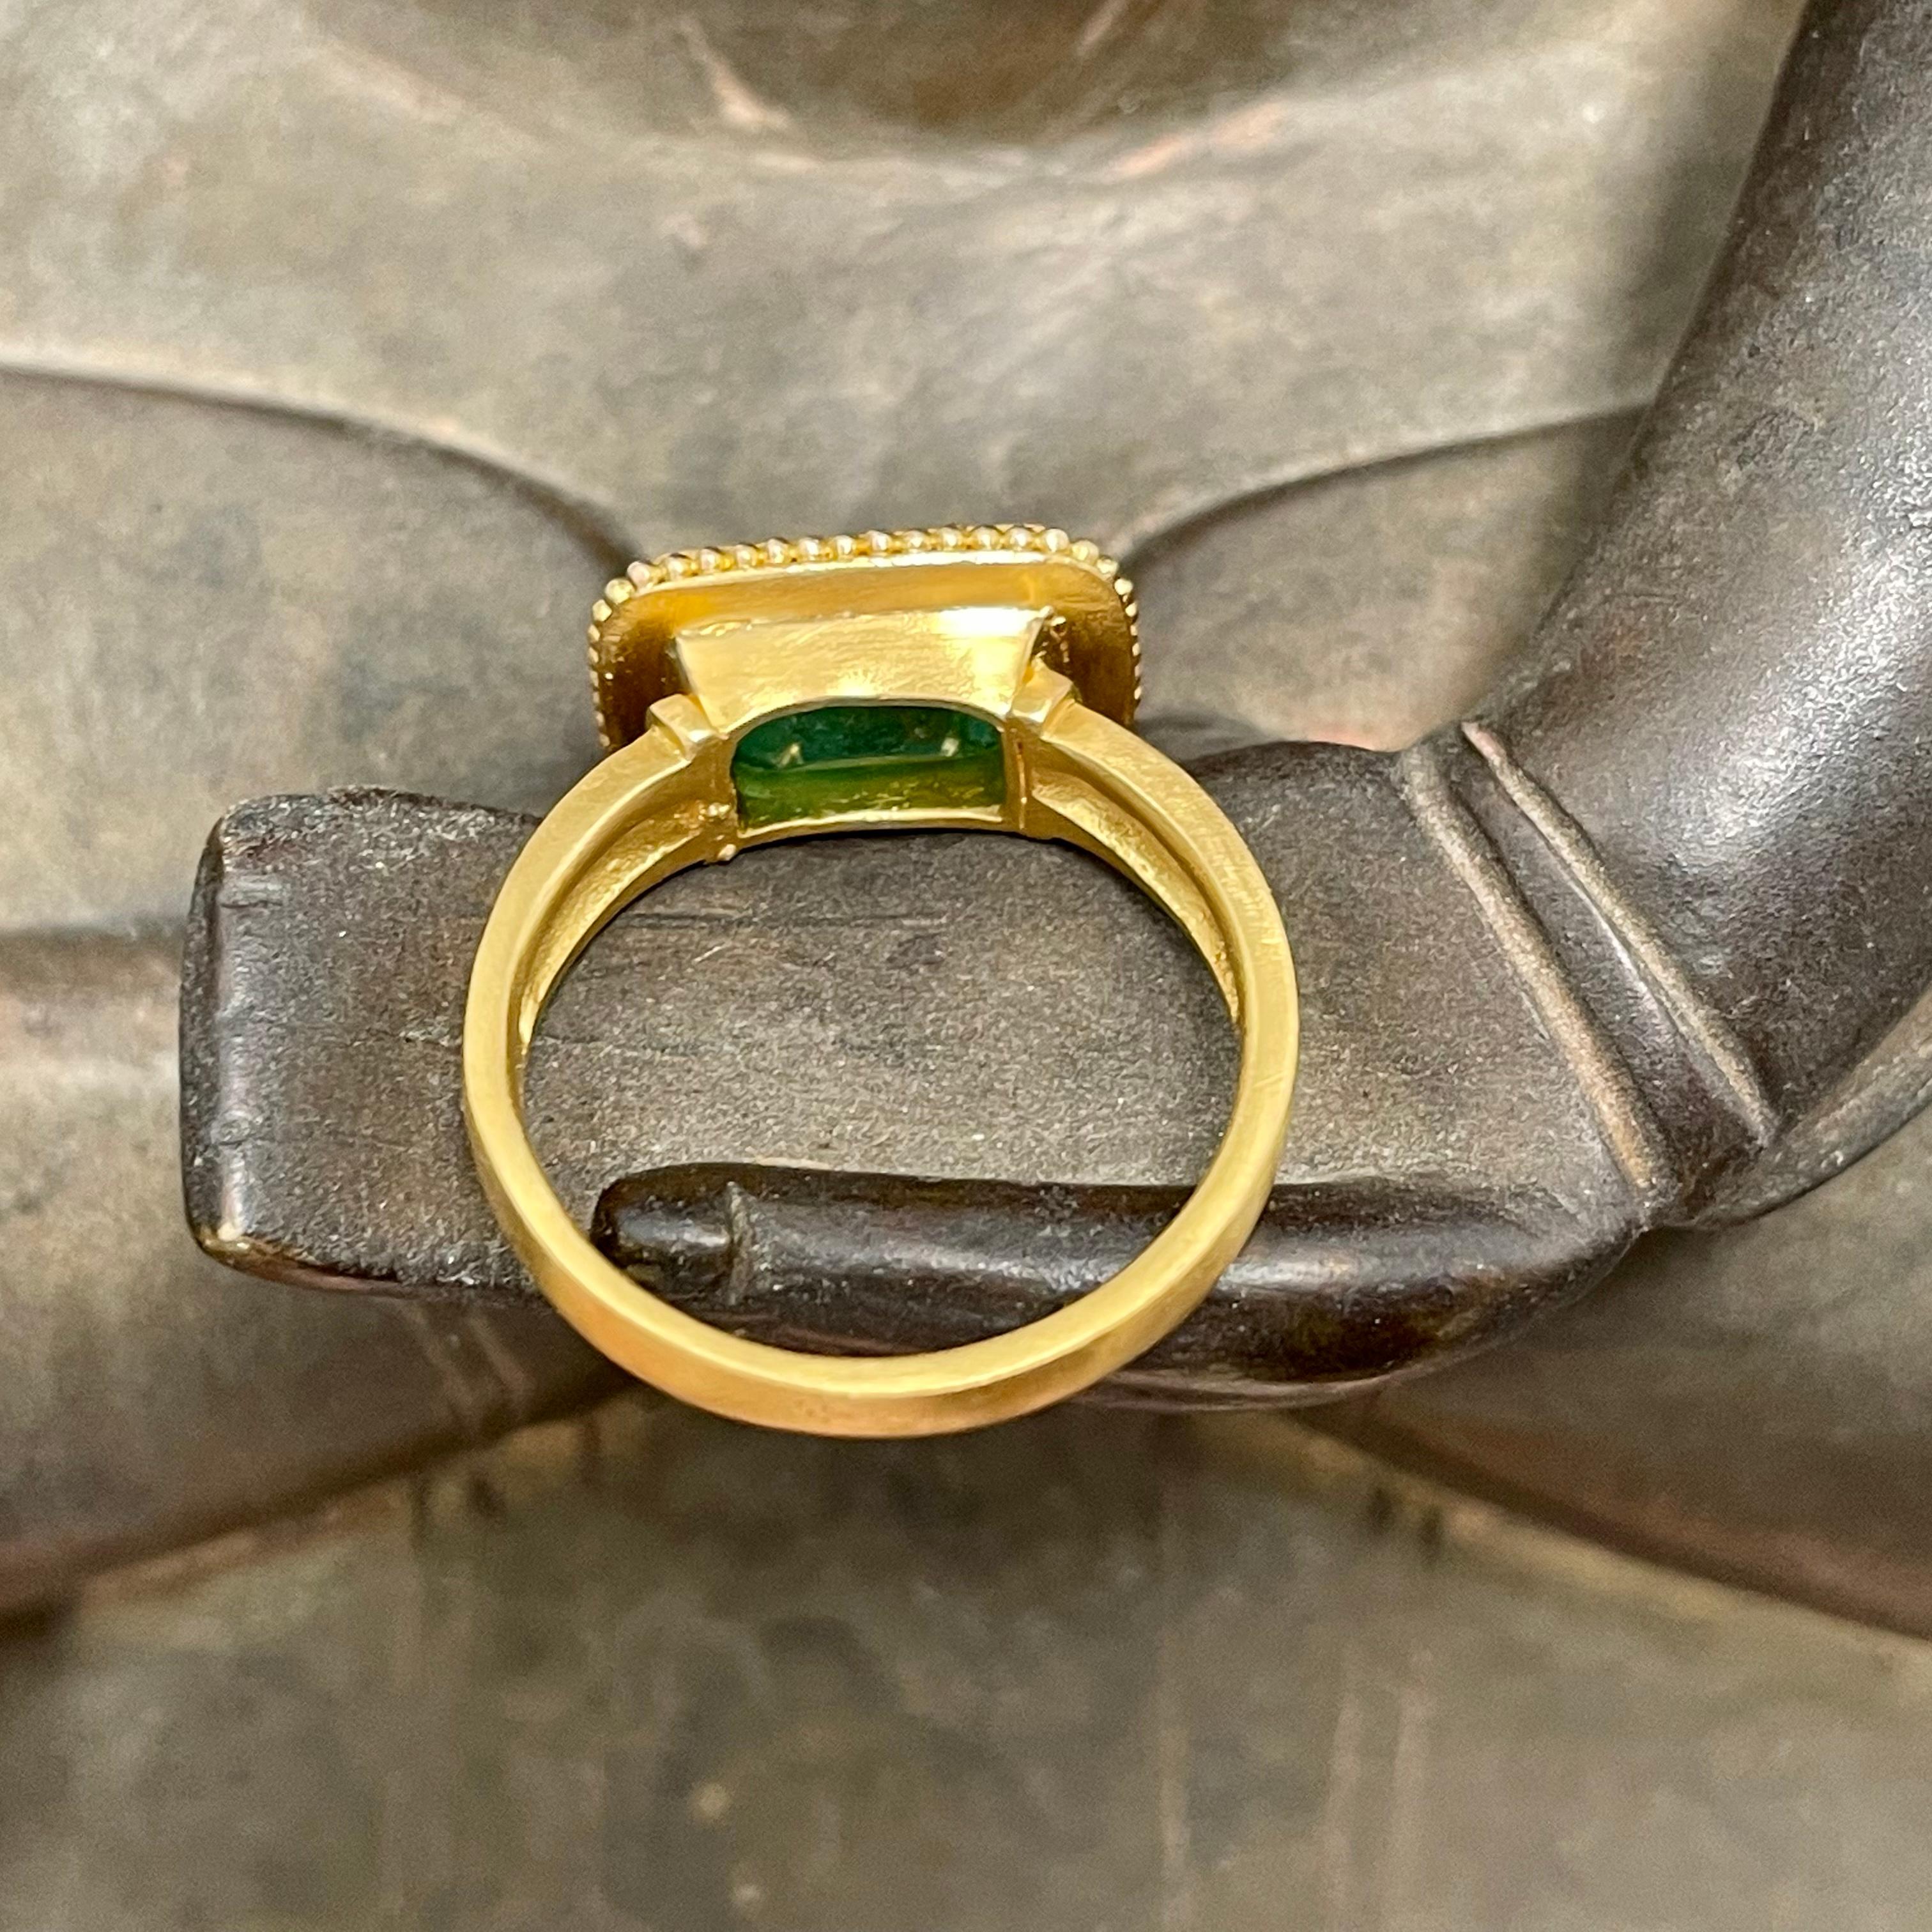 Steven Battelle 2.8 Carat Zambian Emerald 22K Gold Ring  In New Condition For Sale In Soquel, CA